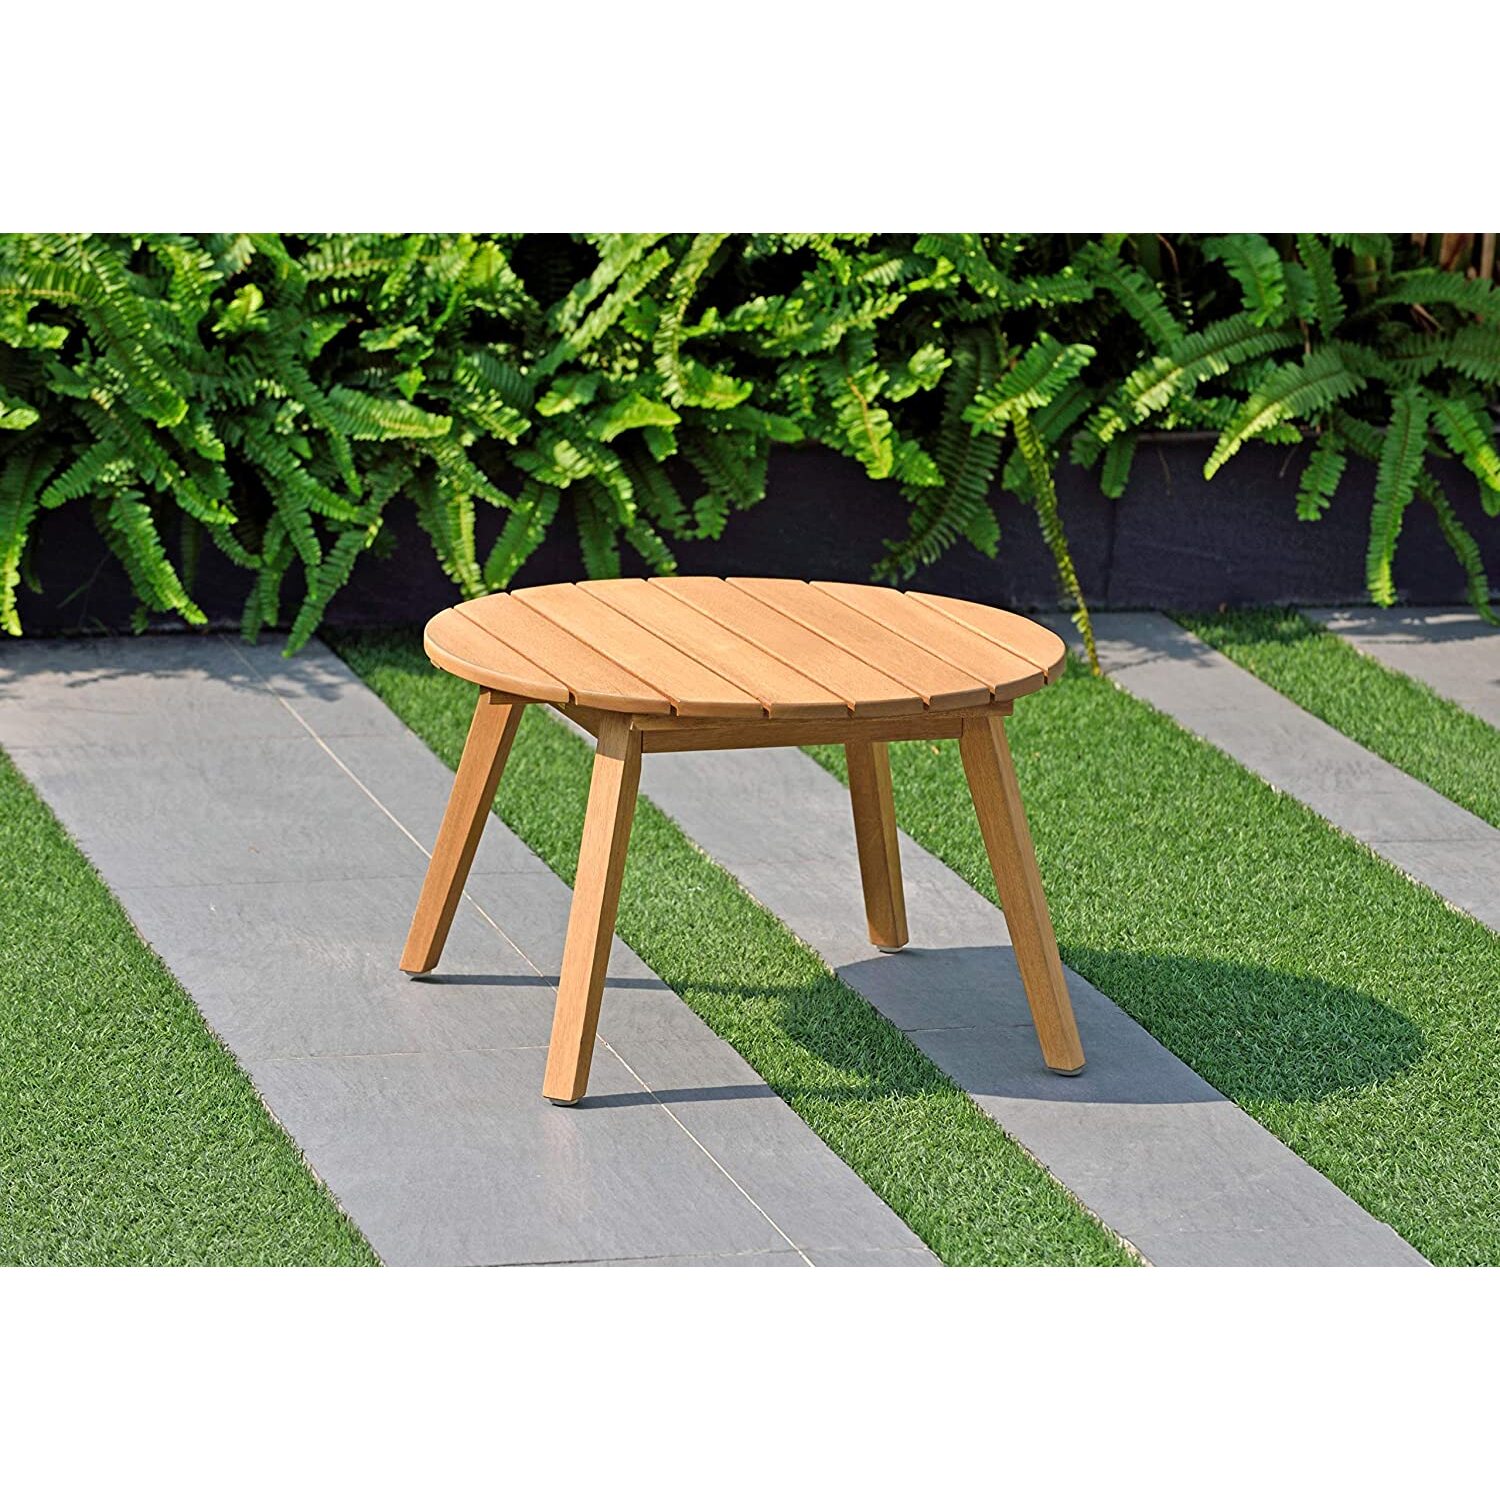 Amazonia Ashland Patio Round Side Table  Durable Eucalyptus with Teak Finish  Ideal for Indoors and Outdoors - image 1 of 1